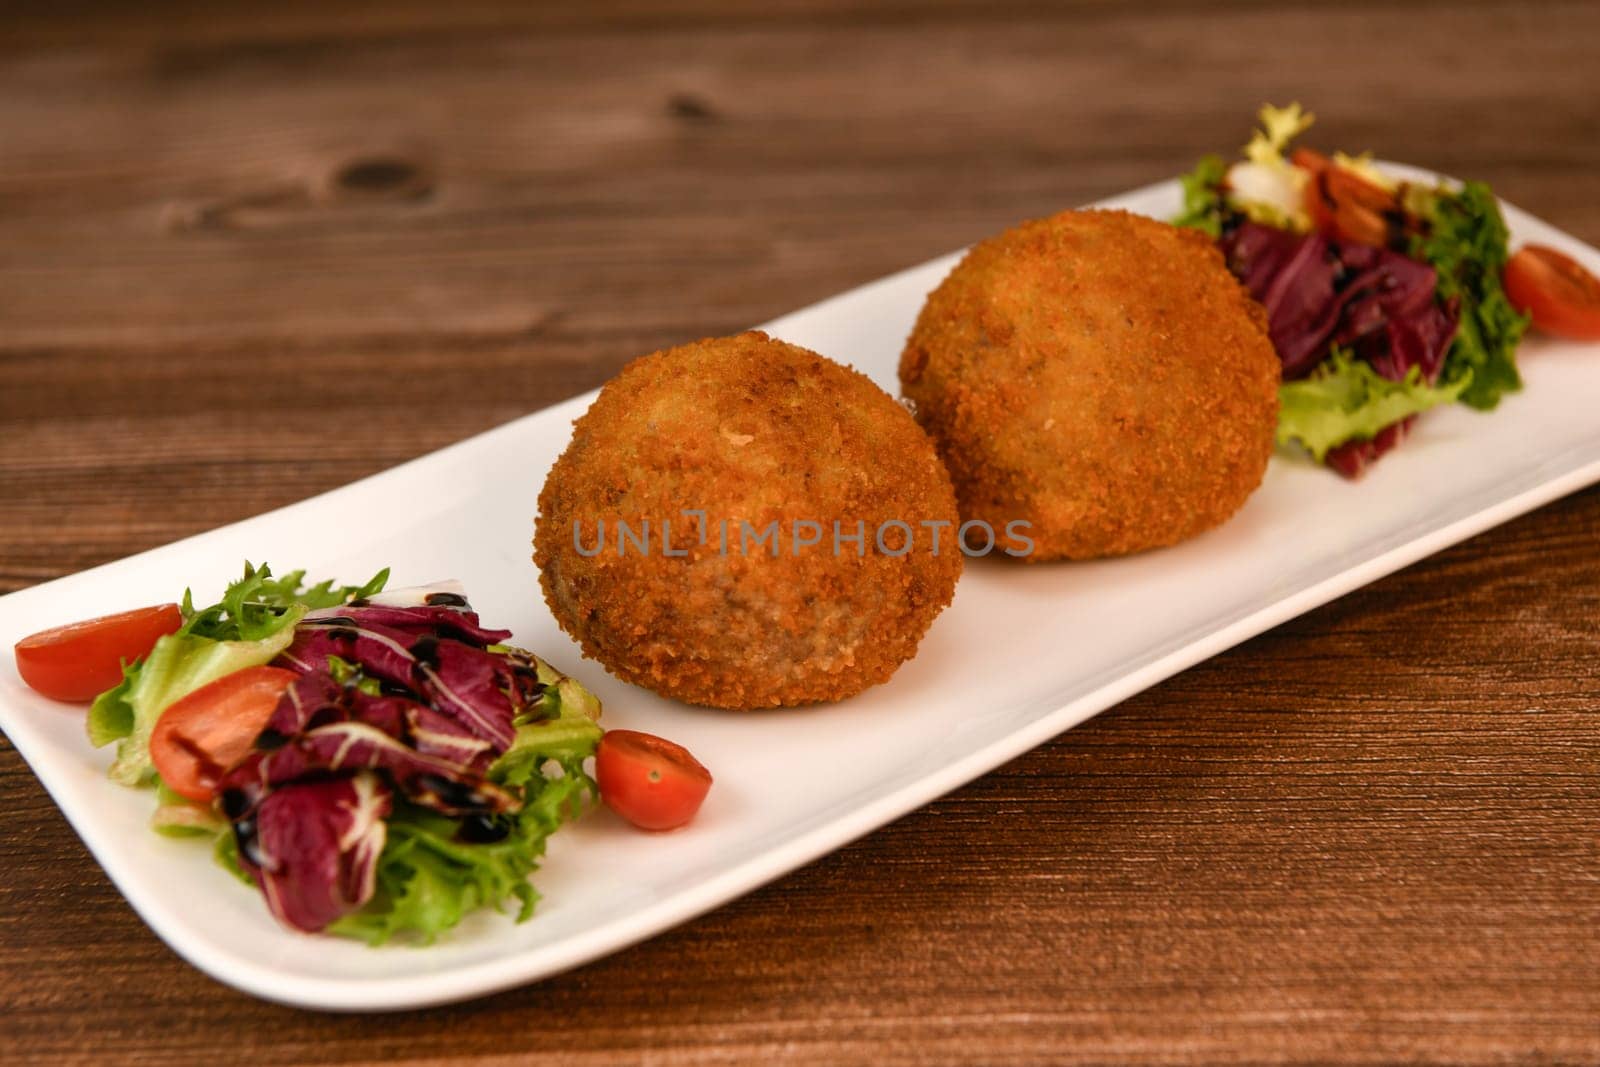 RECIPE FOR BREADED BEEF MEATBALLS STUFFED WITH A SOFT BOILED EGG. High quality photo